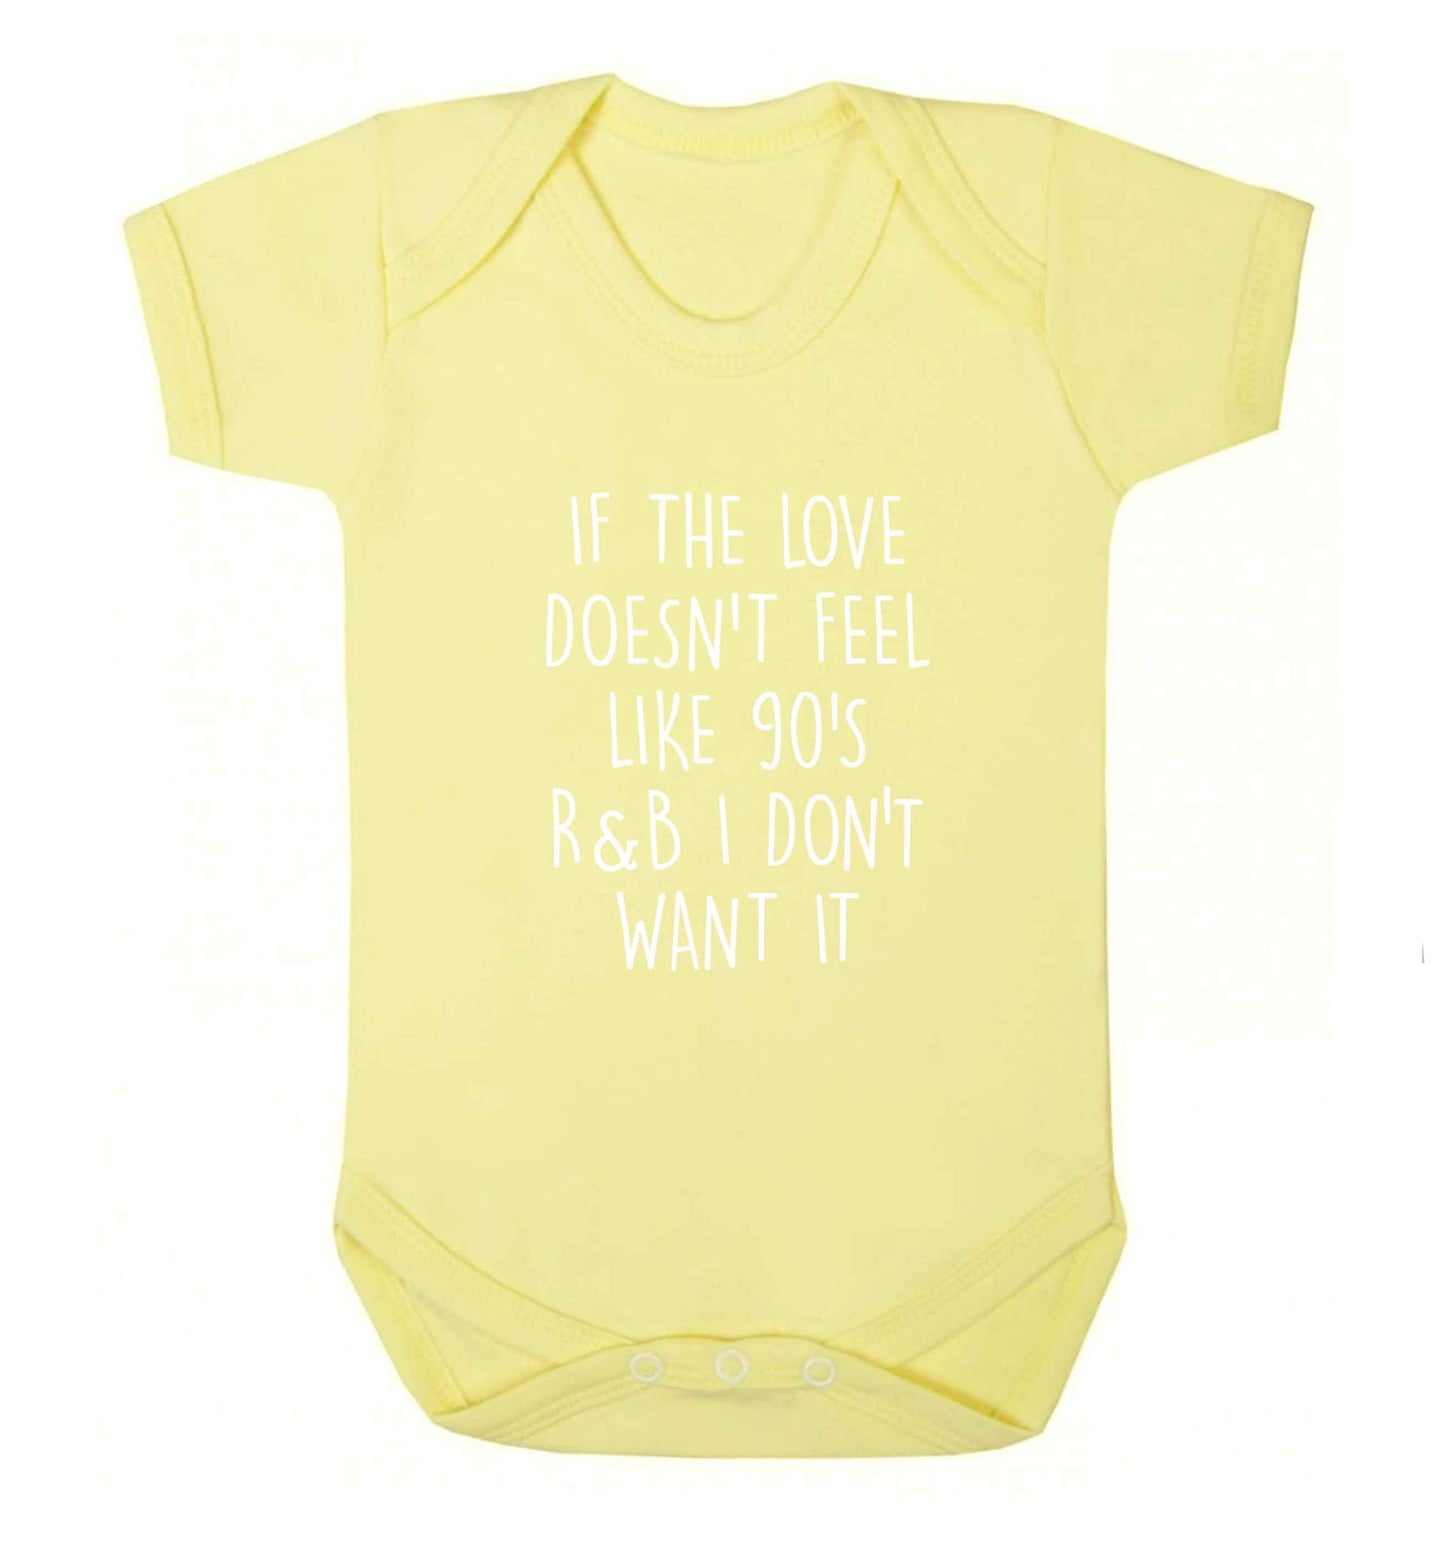 If the love doesn't feel like 90's r&b I don't want it baby vest pale yellow 18-24 months